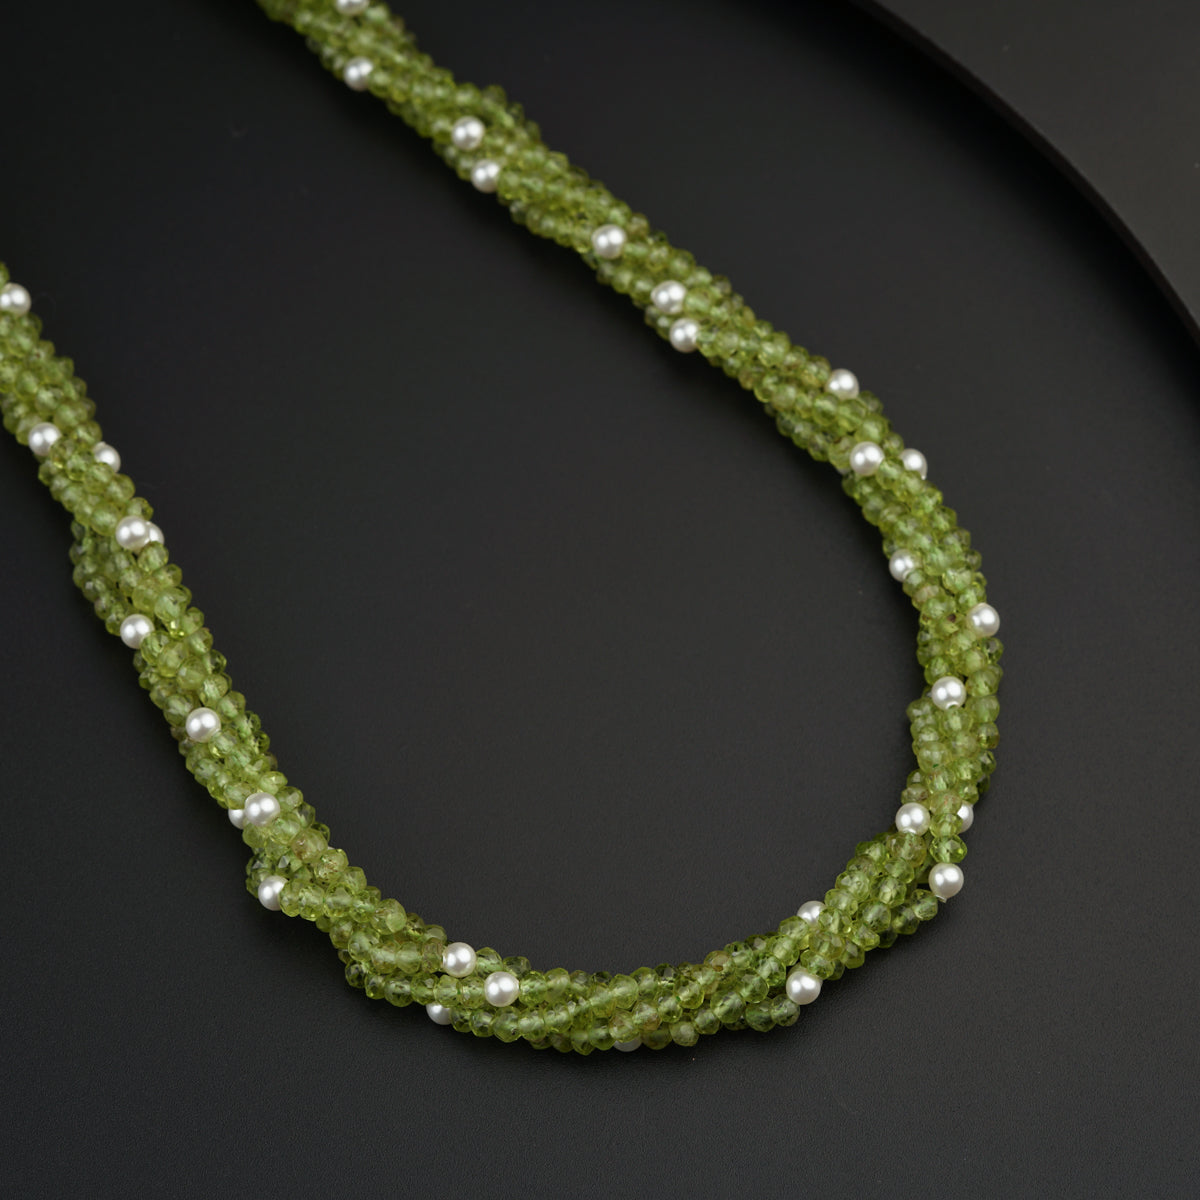 a green beaded necklace on a black plate